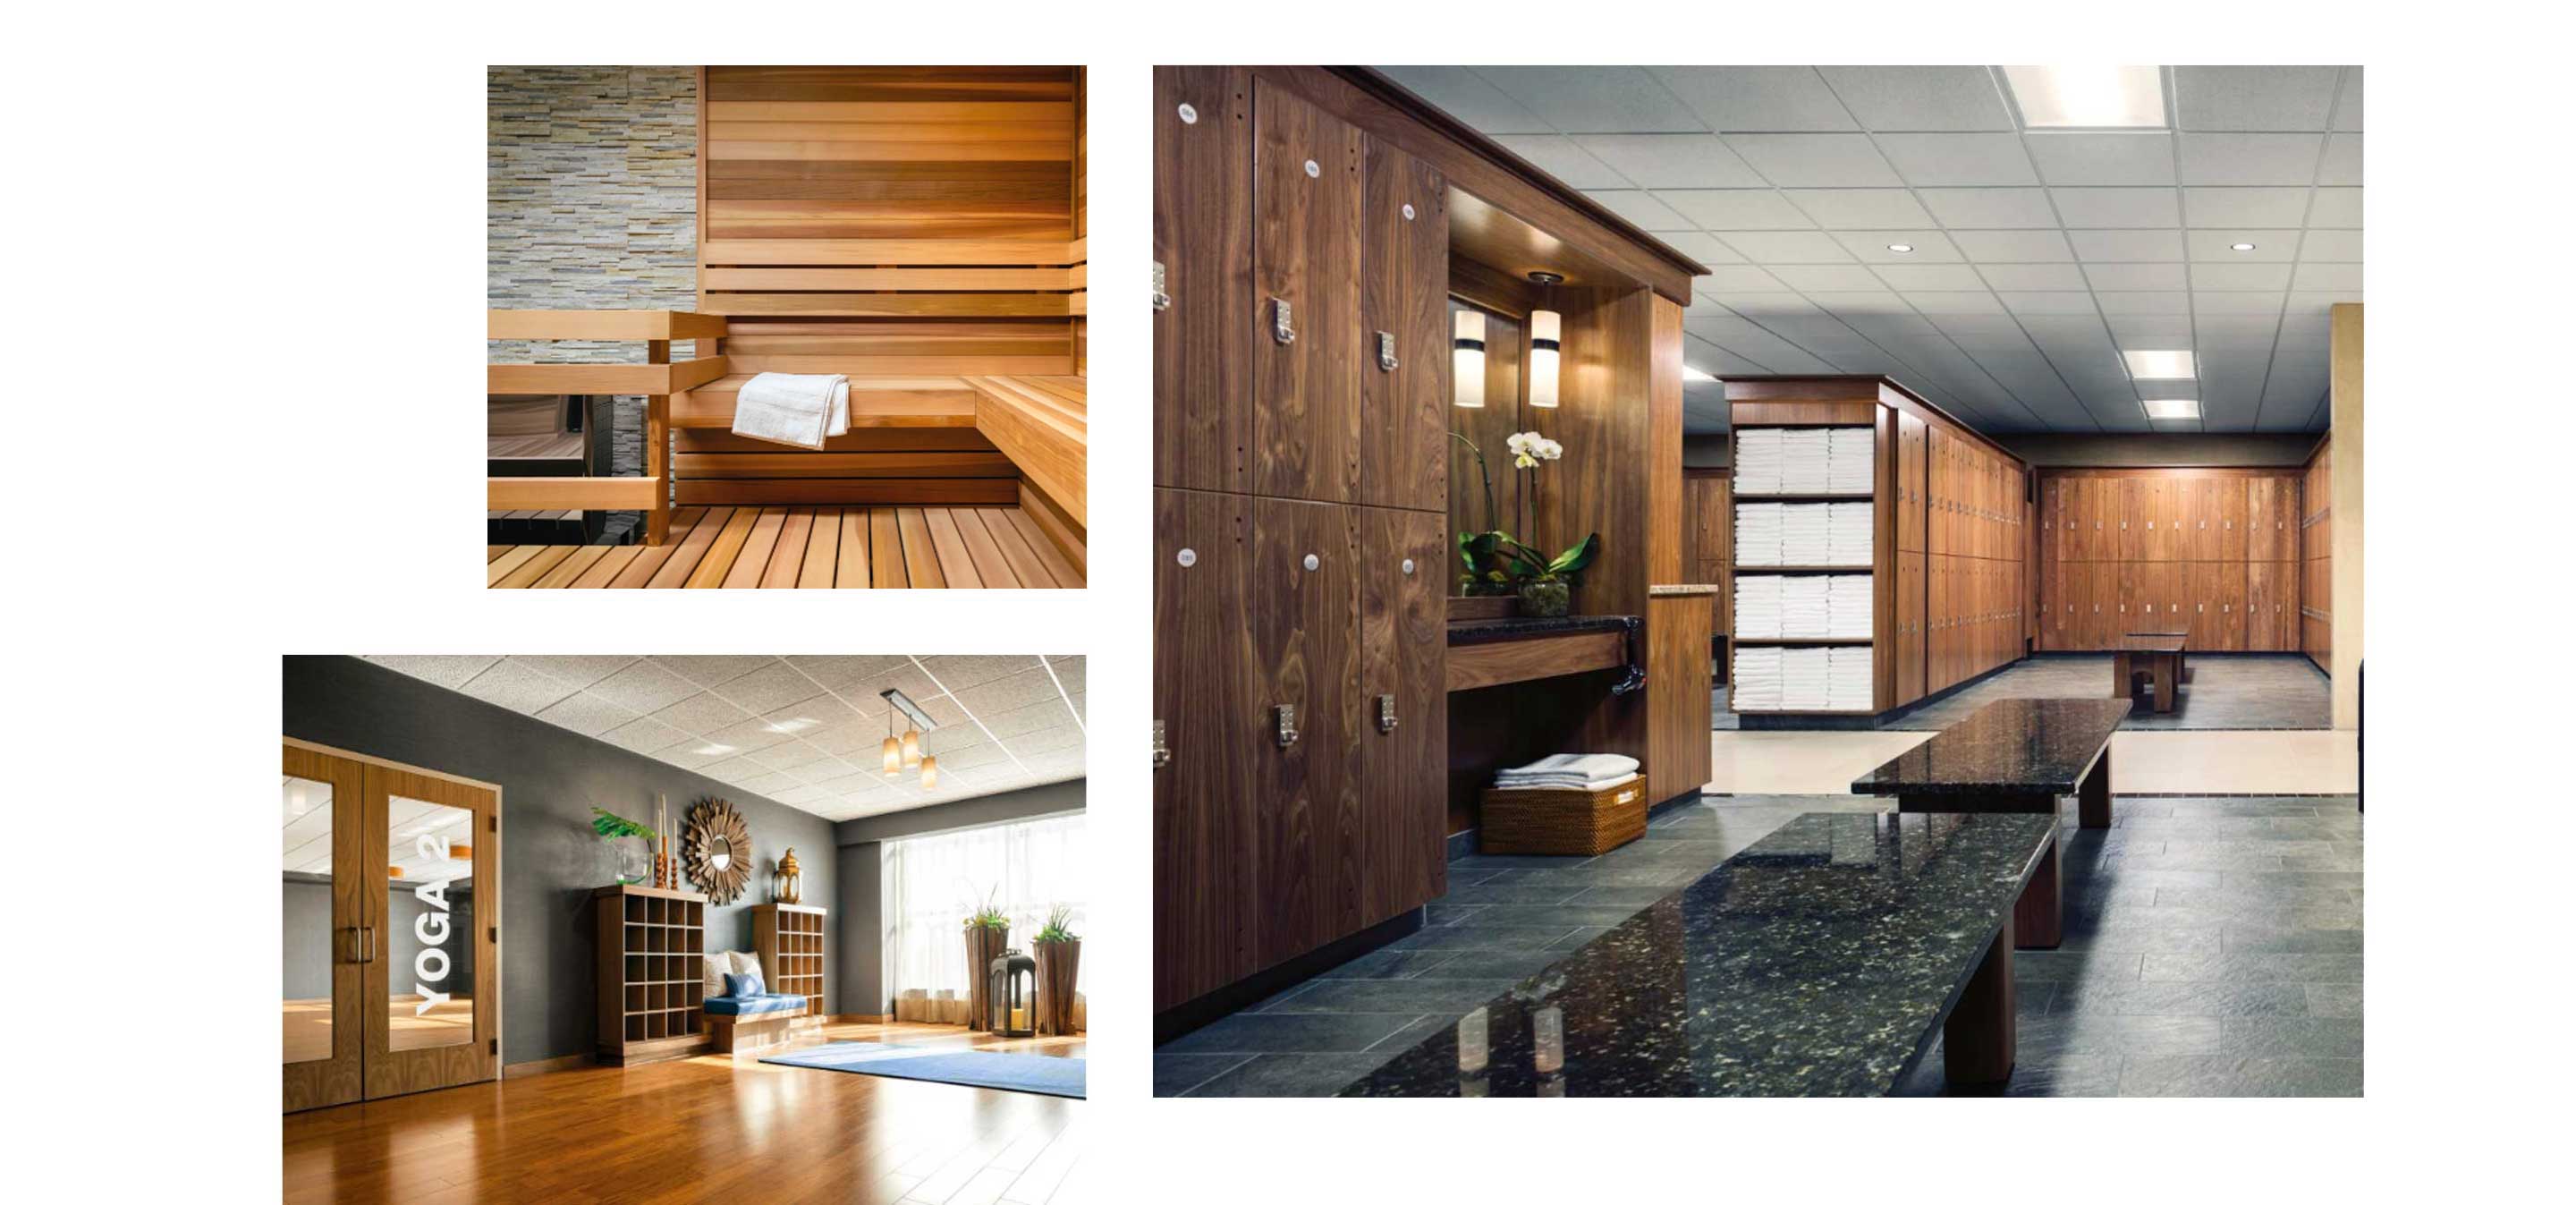 A collage of 3 images showcase Life Time's luxury amenities: a wood paneled sauna, a wood and marble locker room with rows of towels, a brightly lit yoga studio.